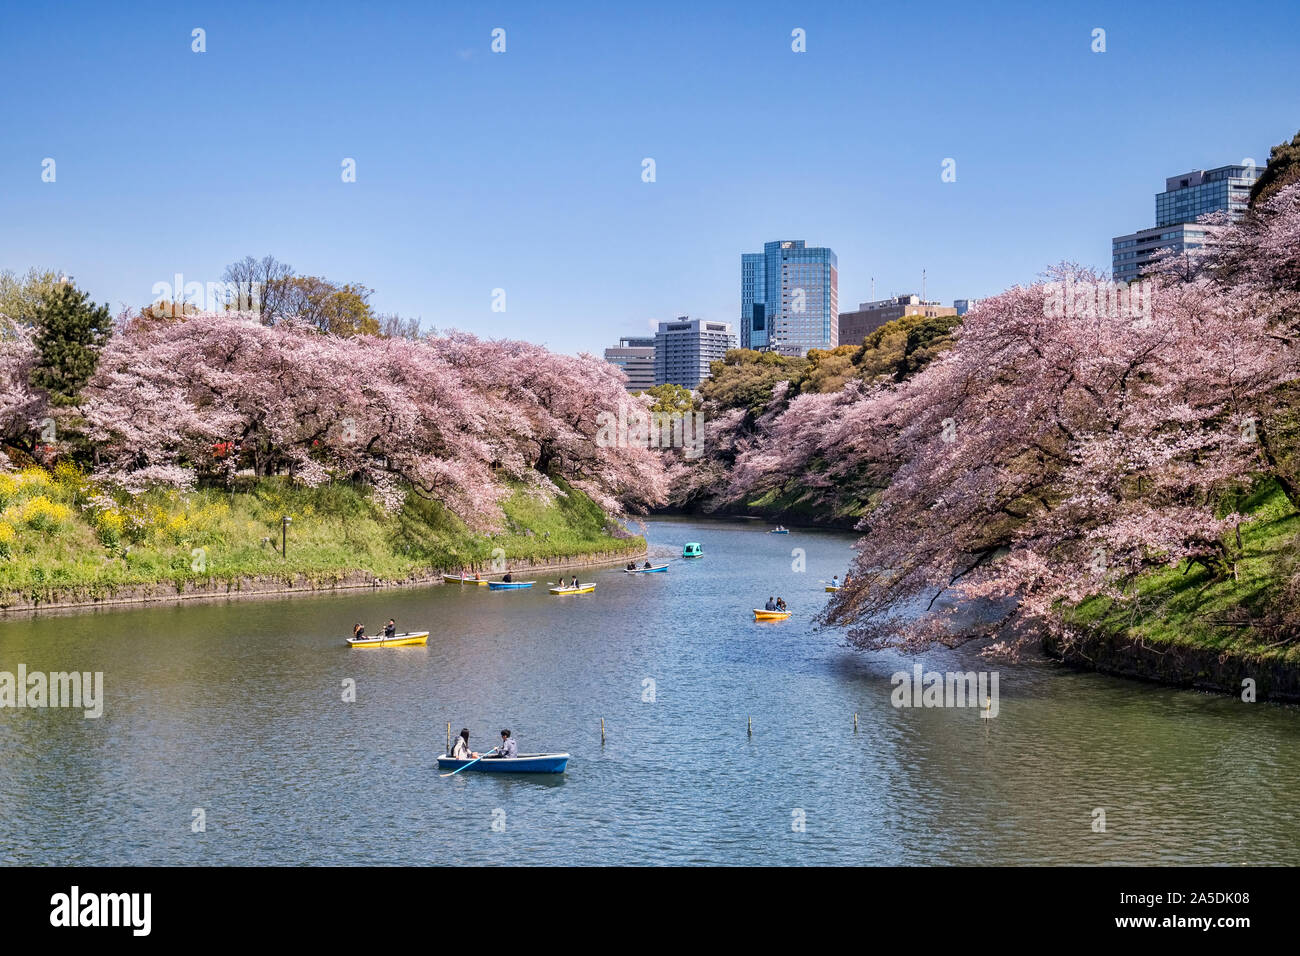 Boats on the Imperial Palace moat in Tokyo in cherry blossom season. Stock Photo